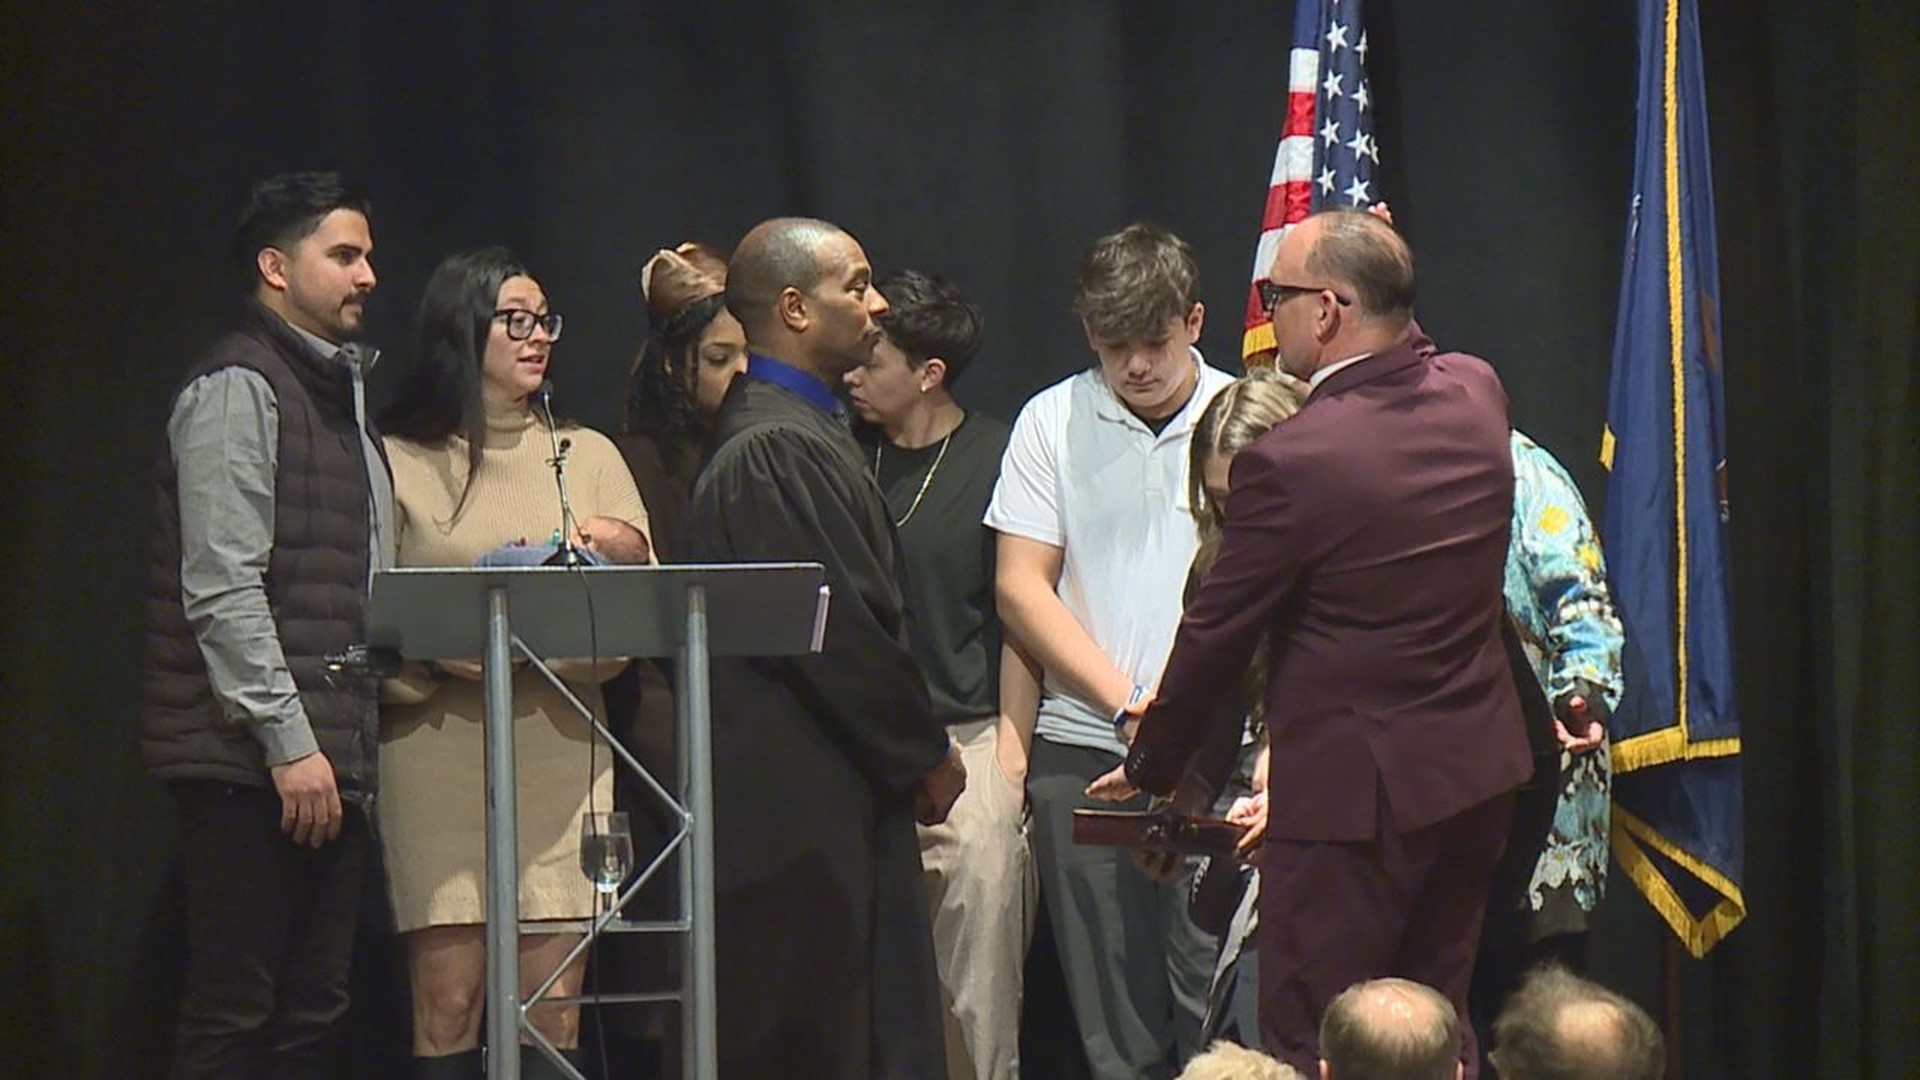 A new year means a new group of elected officials taking office in Dauphin County.